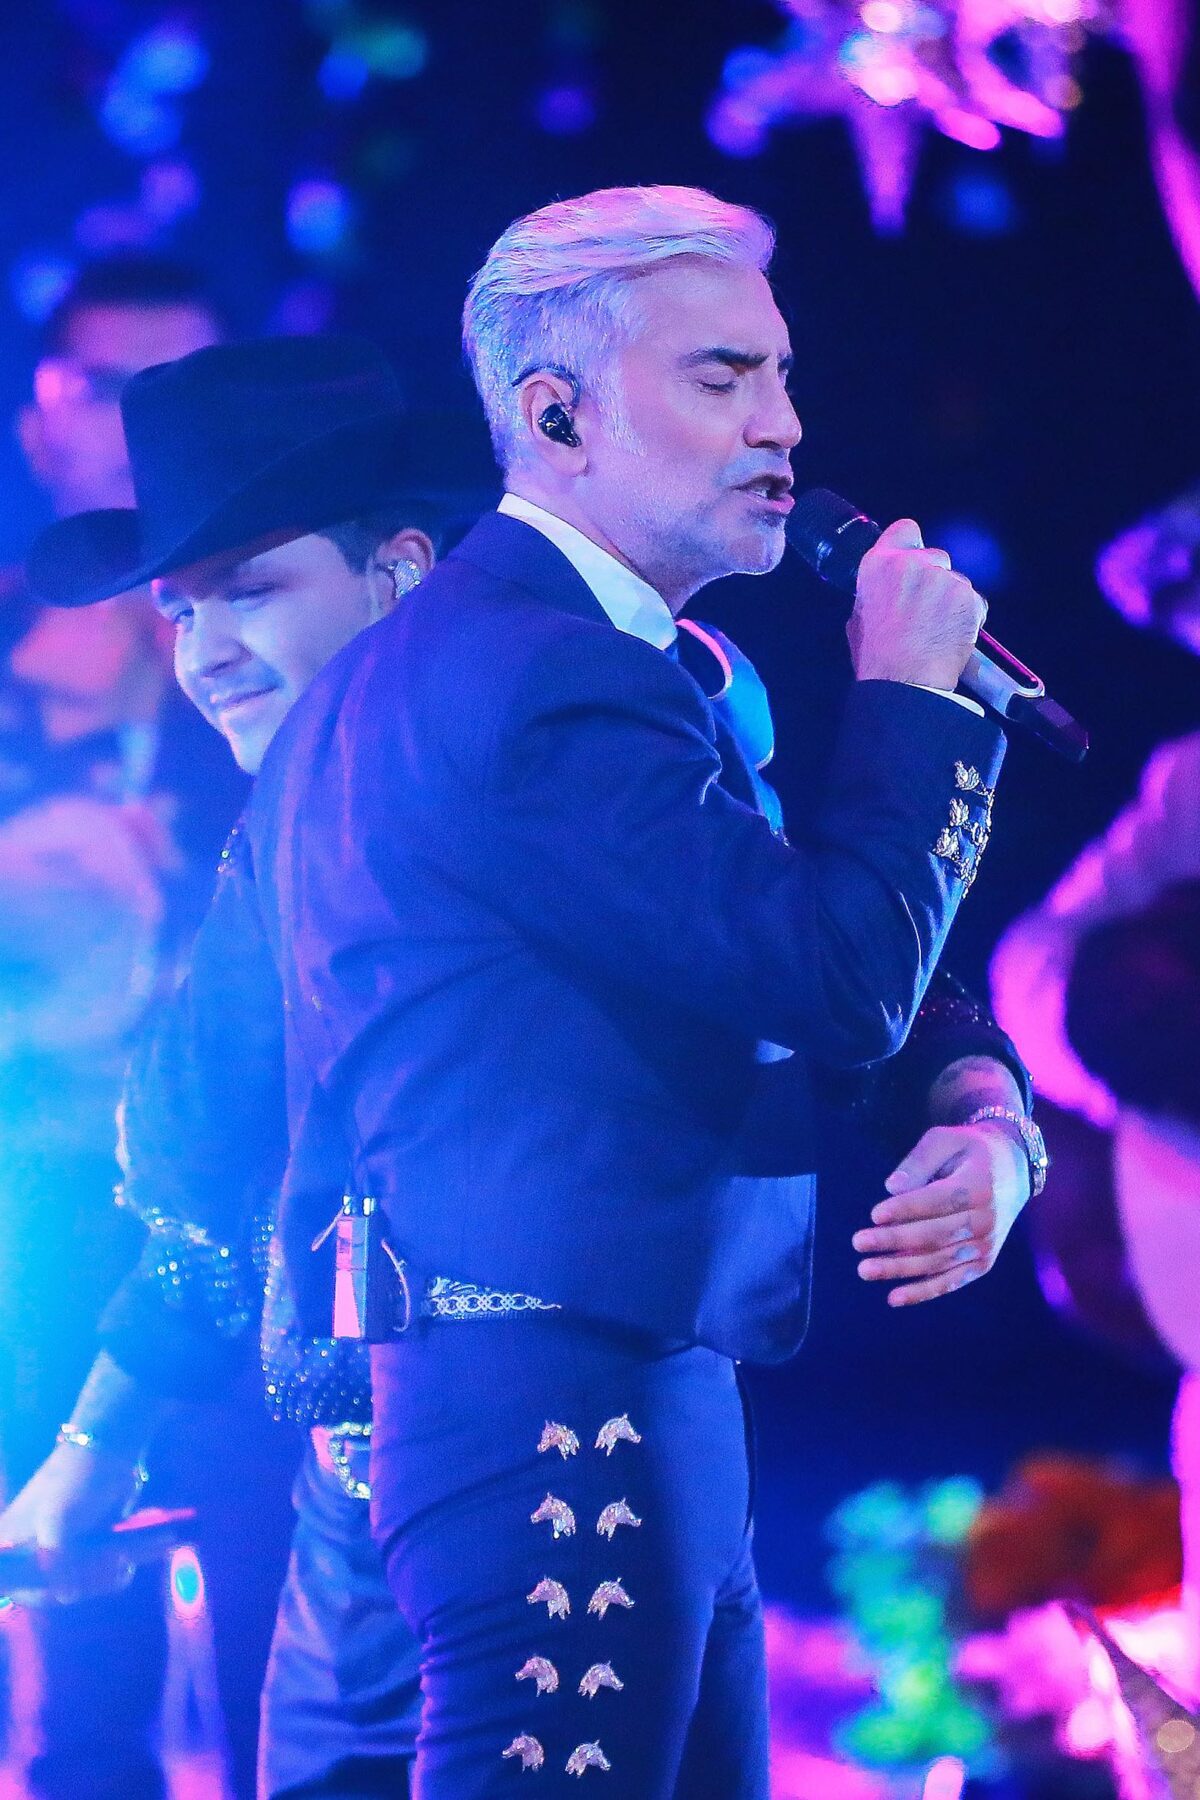 GUADALAJARA, MEXICO - OCTOBER 28: In this image released on November 19, Christian Nodal (L) and Alejandro Fernandez (R) performs at the 2020 Latin Grammy Awards on October 28, 2020, in Guadalajara, Mexico. The 2020 Latin Grammy's aired on November 19, 2020.